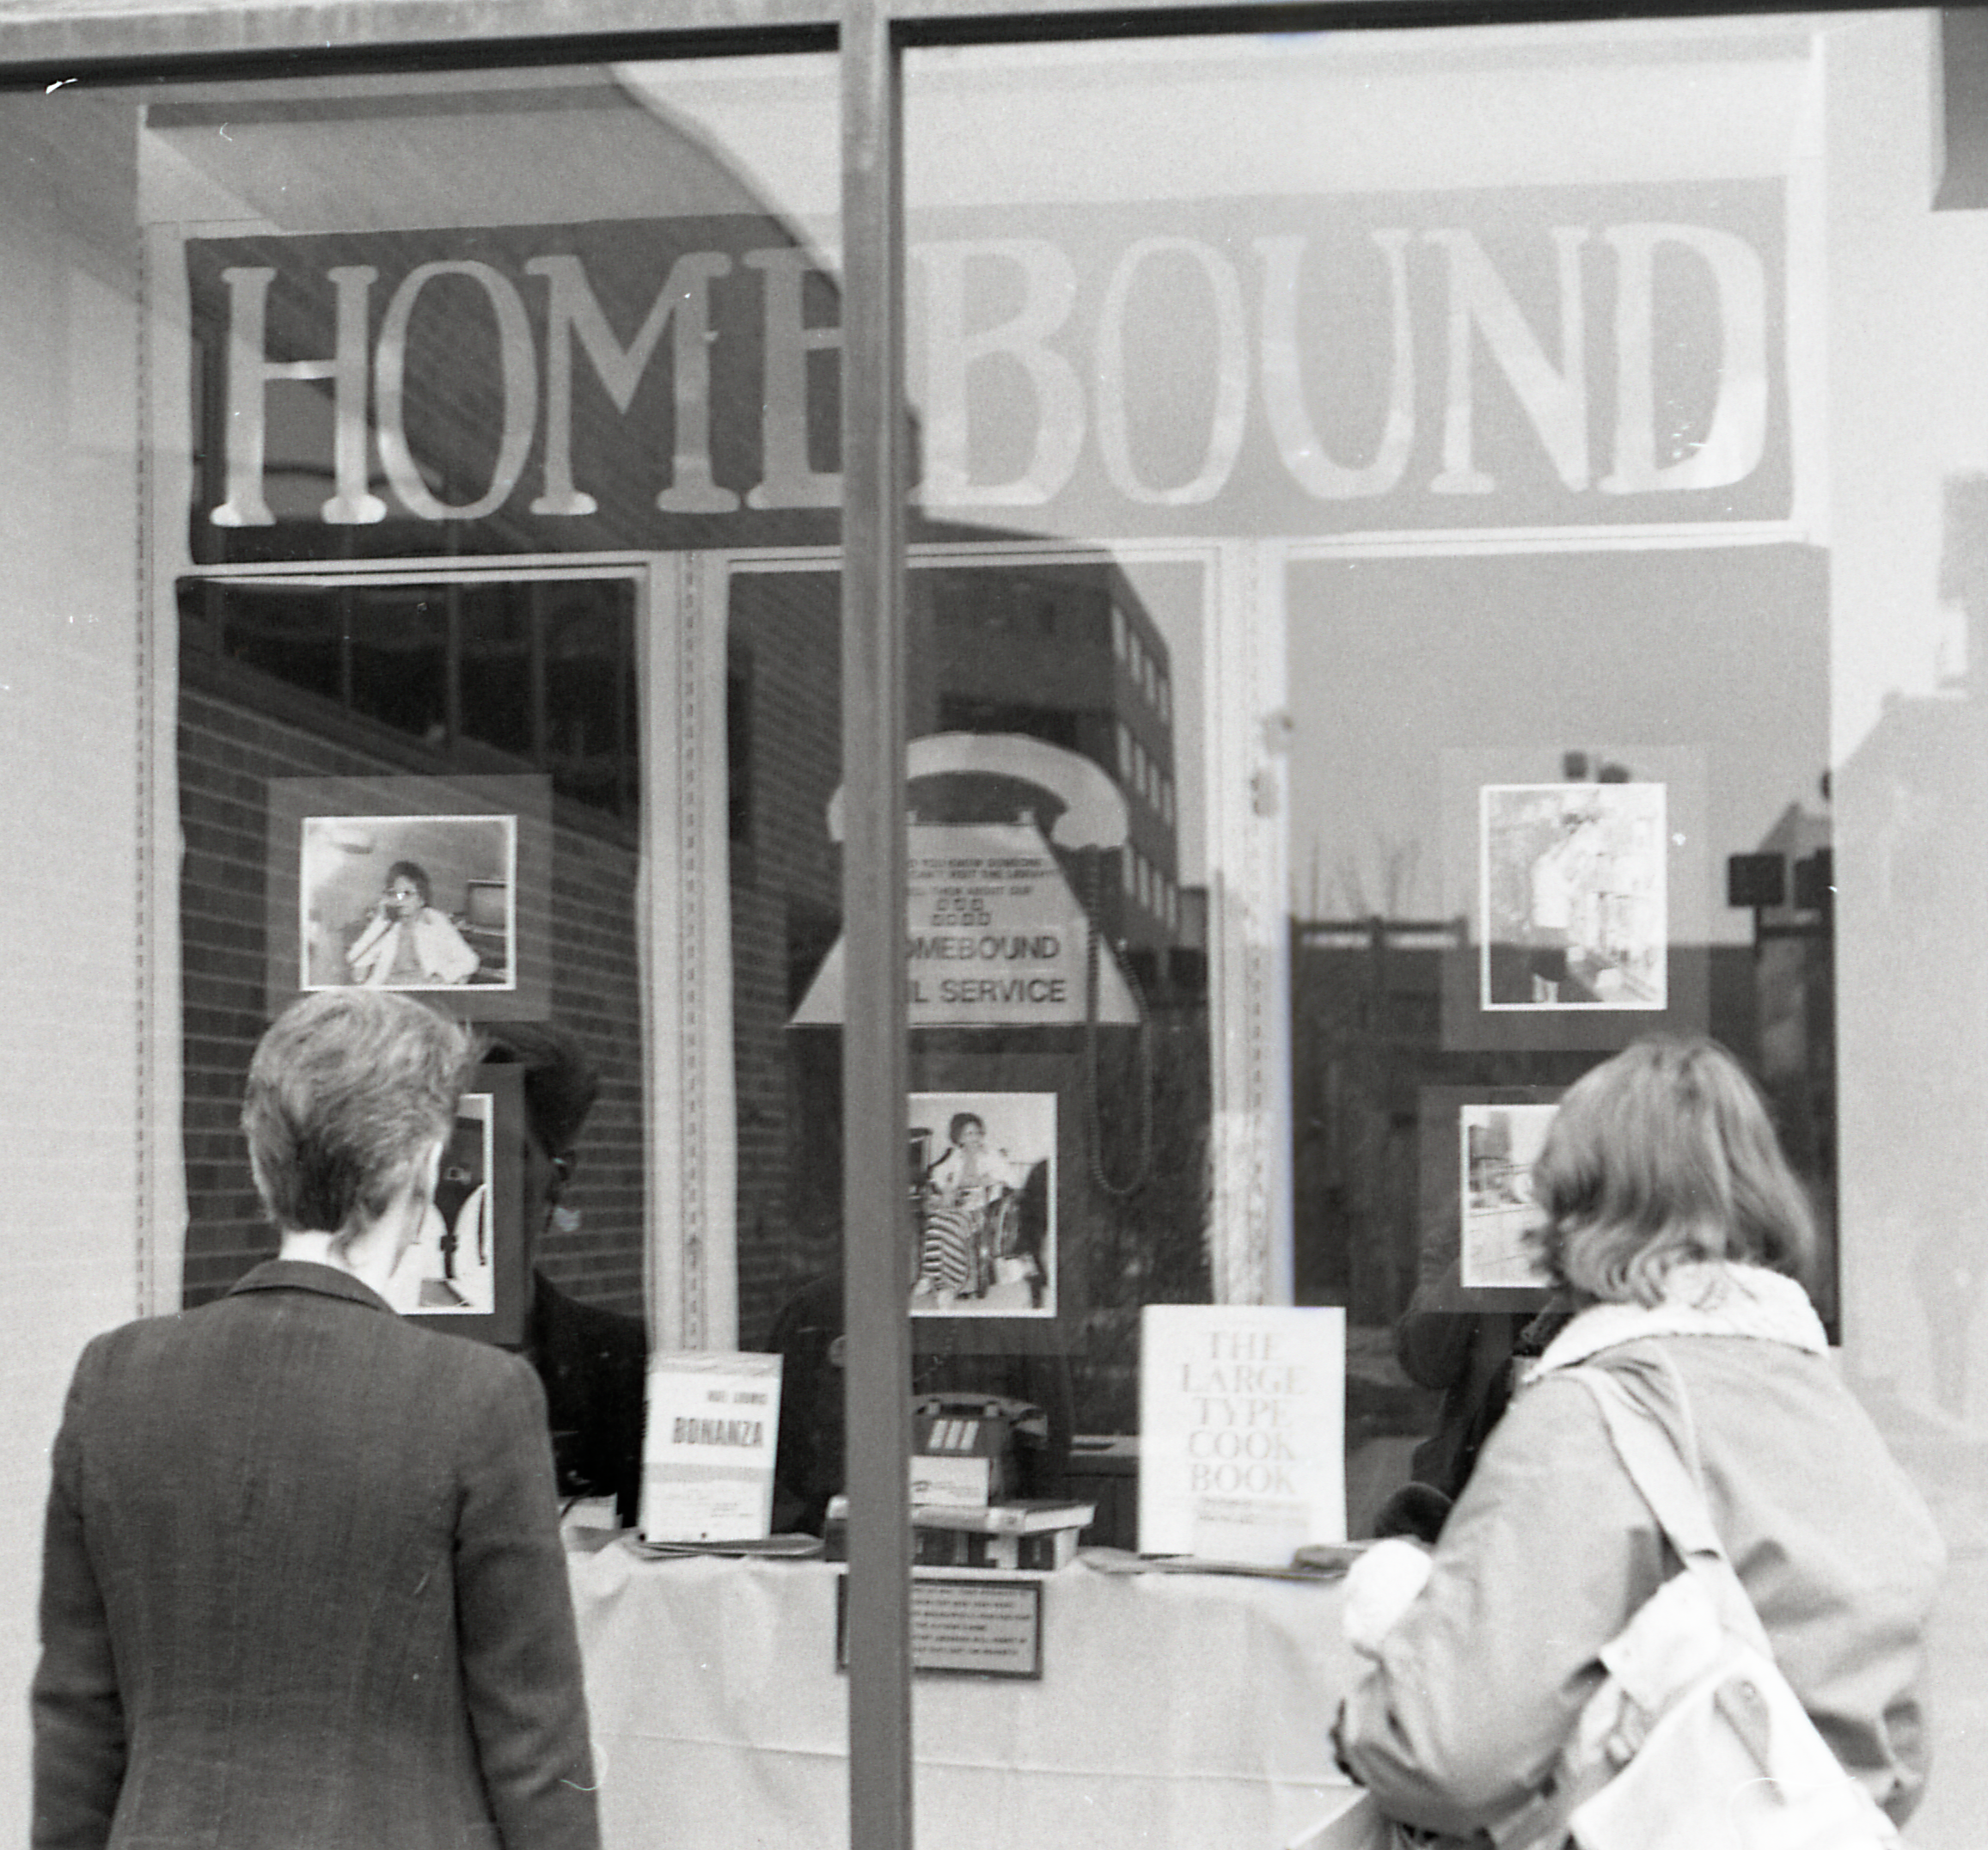 Window with the word "Homebound" displayed in it while two people look on